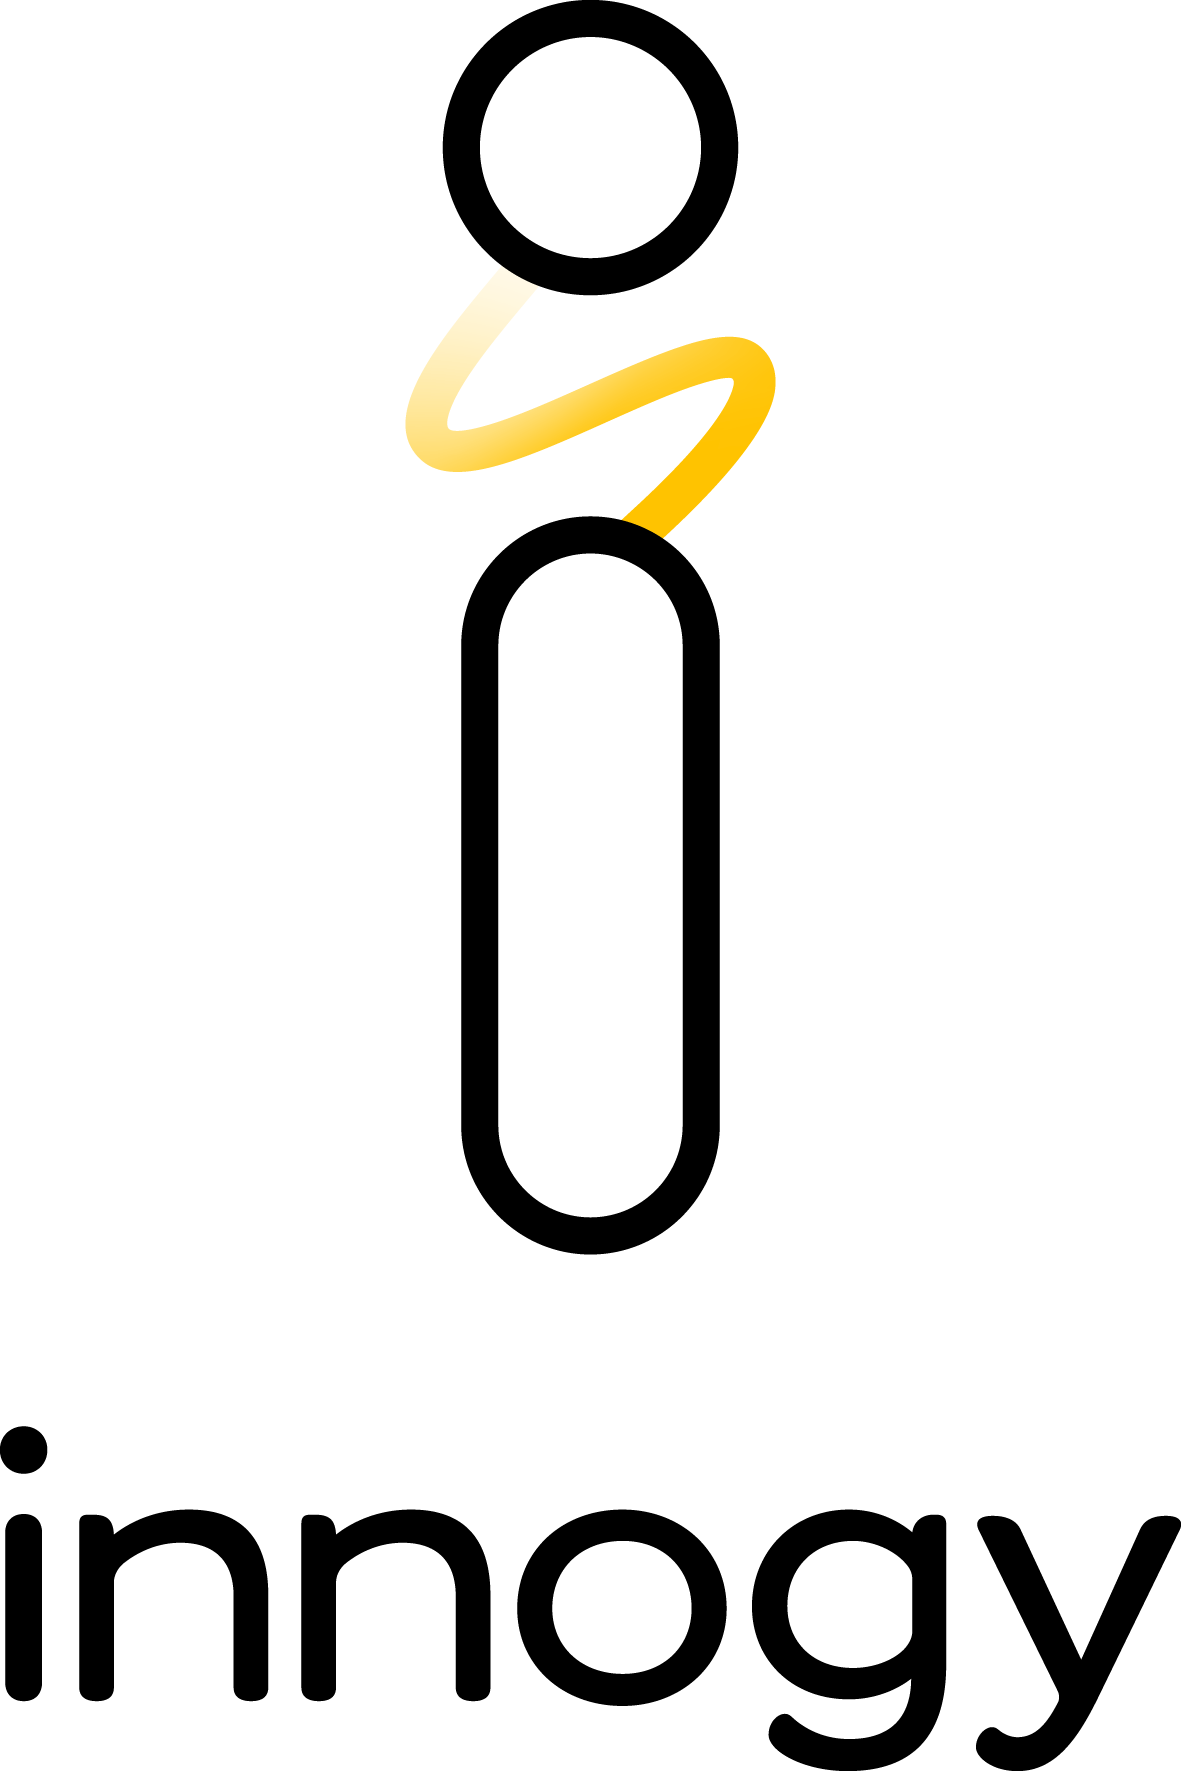 Utilities Can Book A Smart Utility Plan For 12 People - Innogy Logo Png (1181x1771)